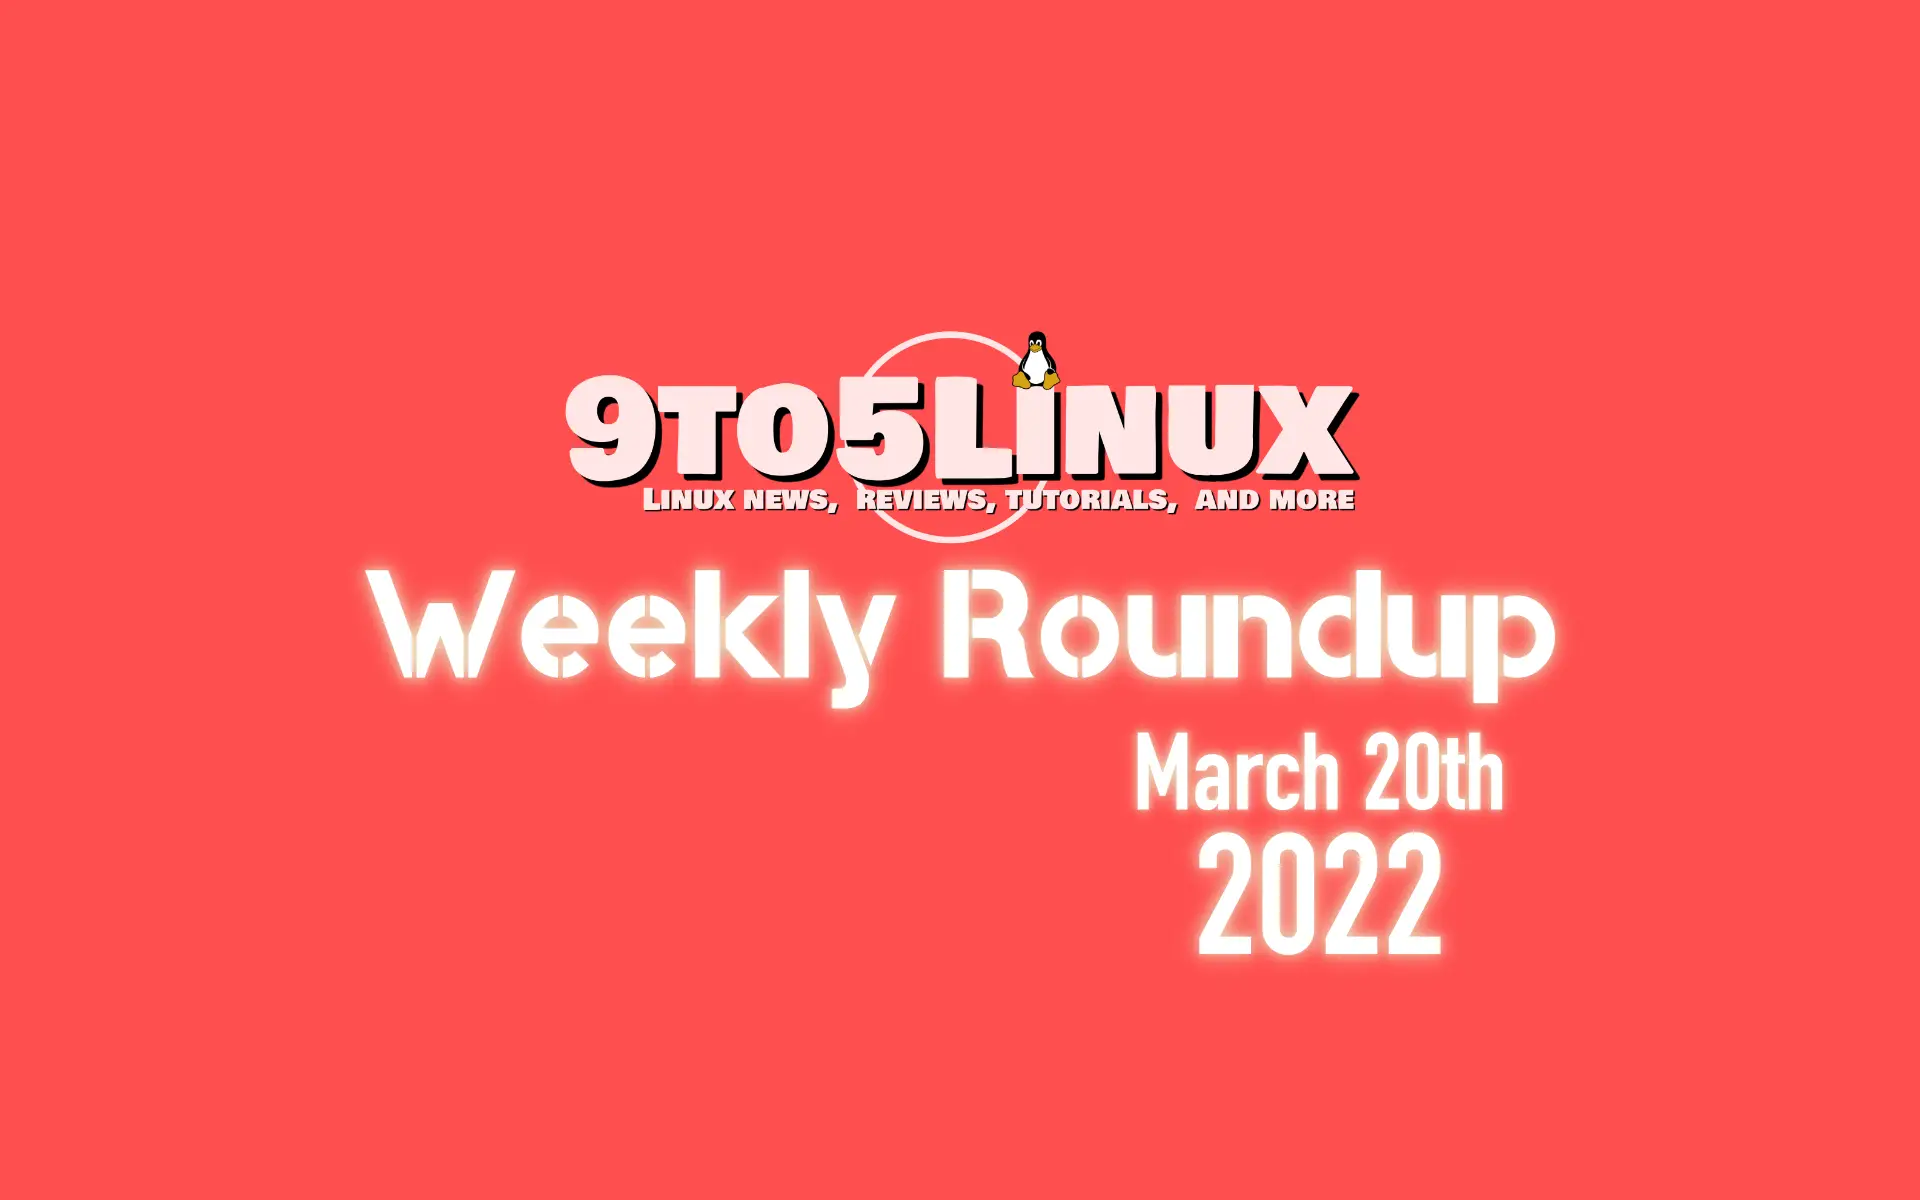 9to5Linux Weekly Roundup: March 20th, 2022